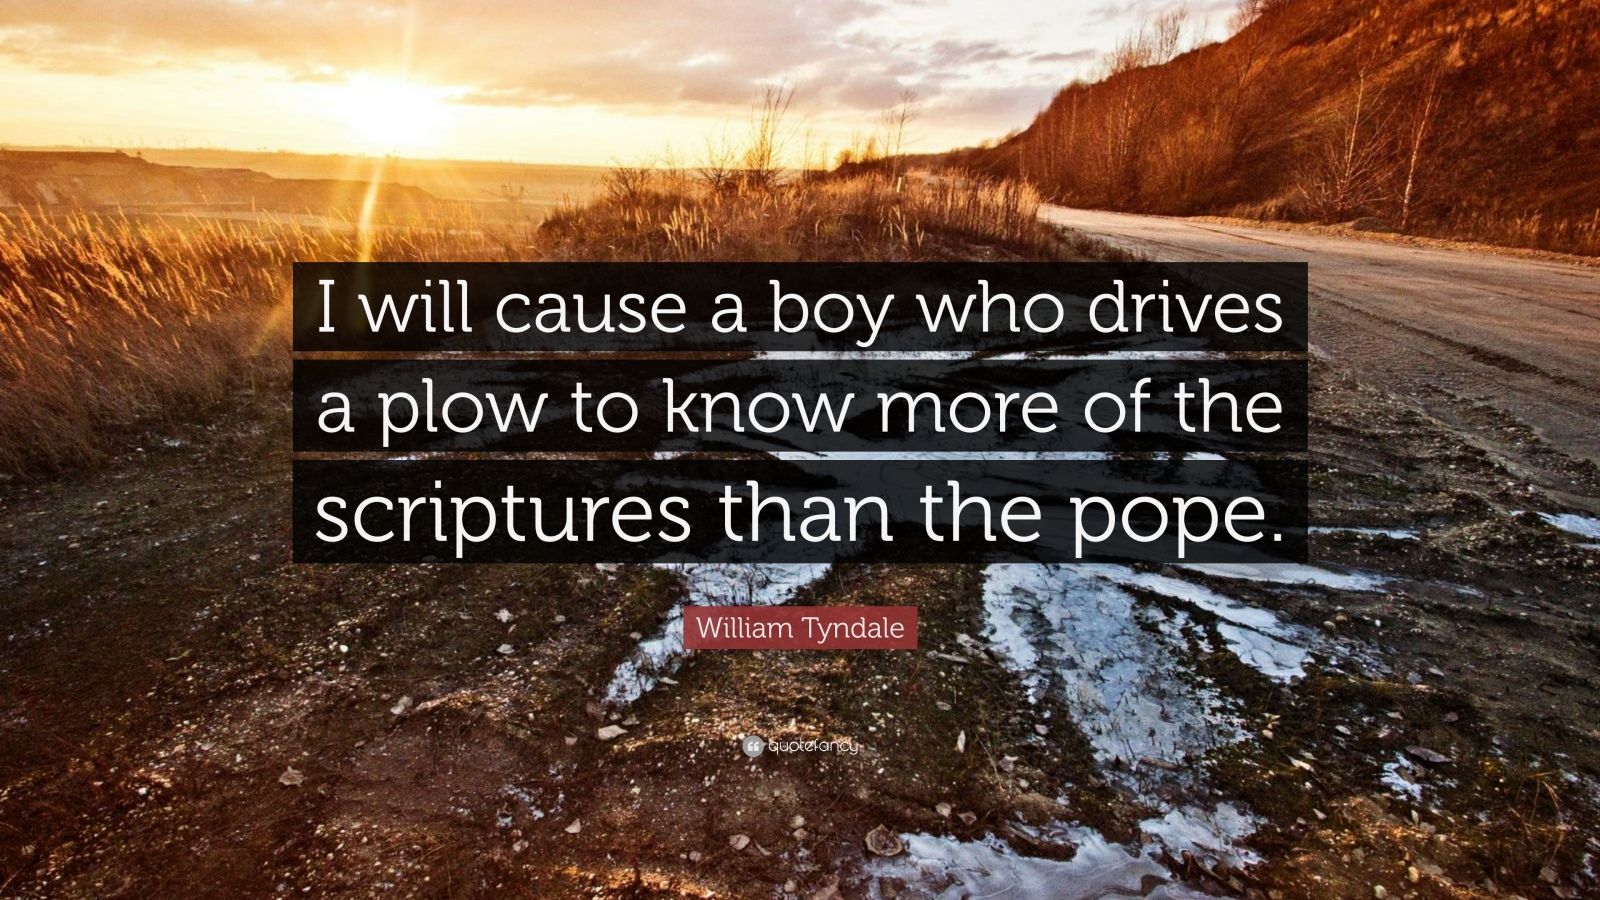 William Tyndale Quote: “I will cause a boy who drives a plow to know